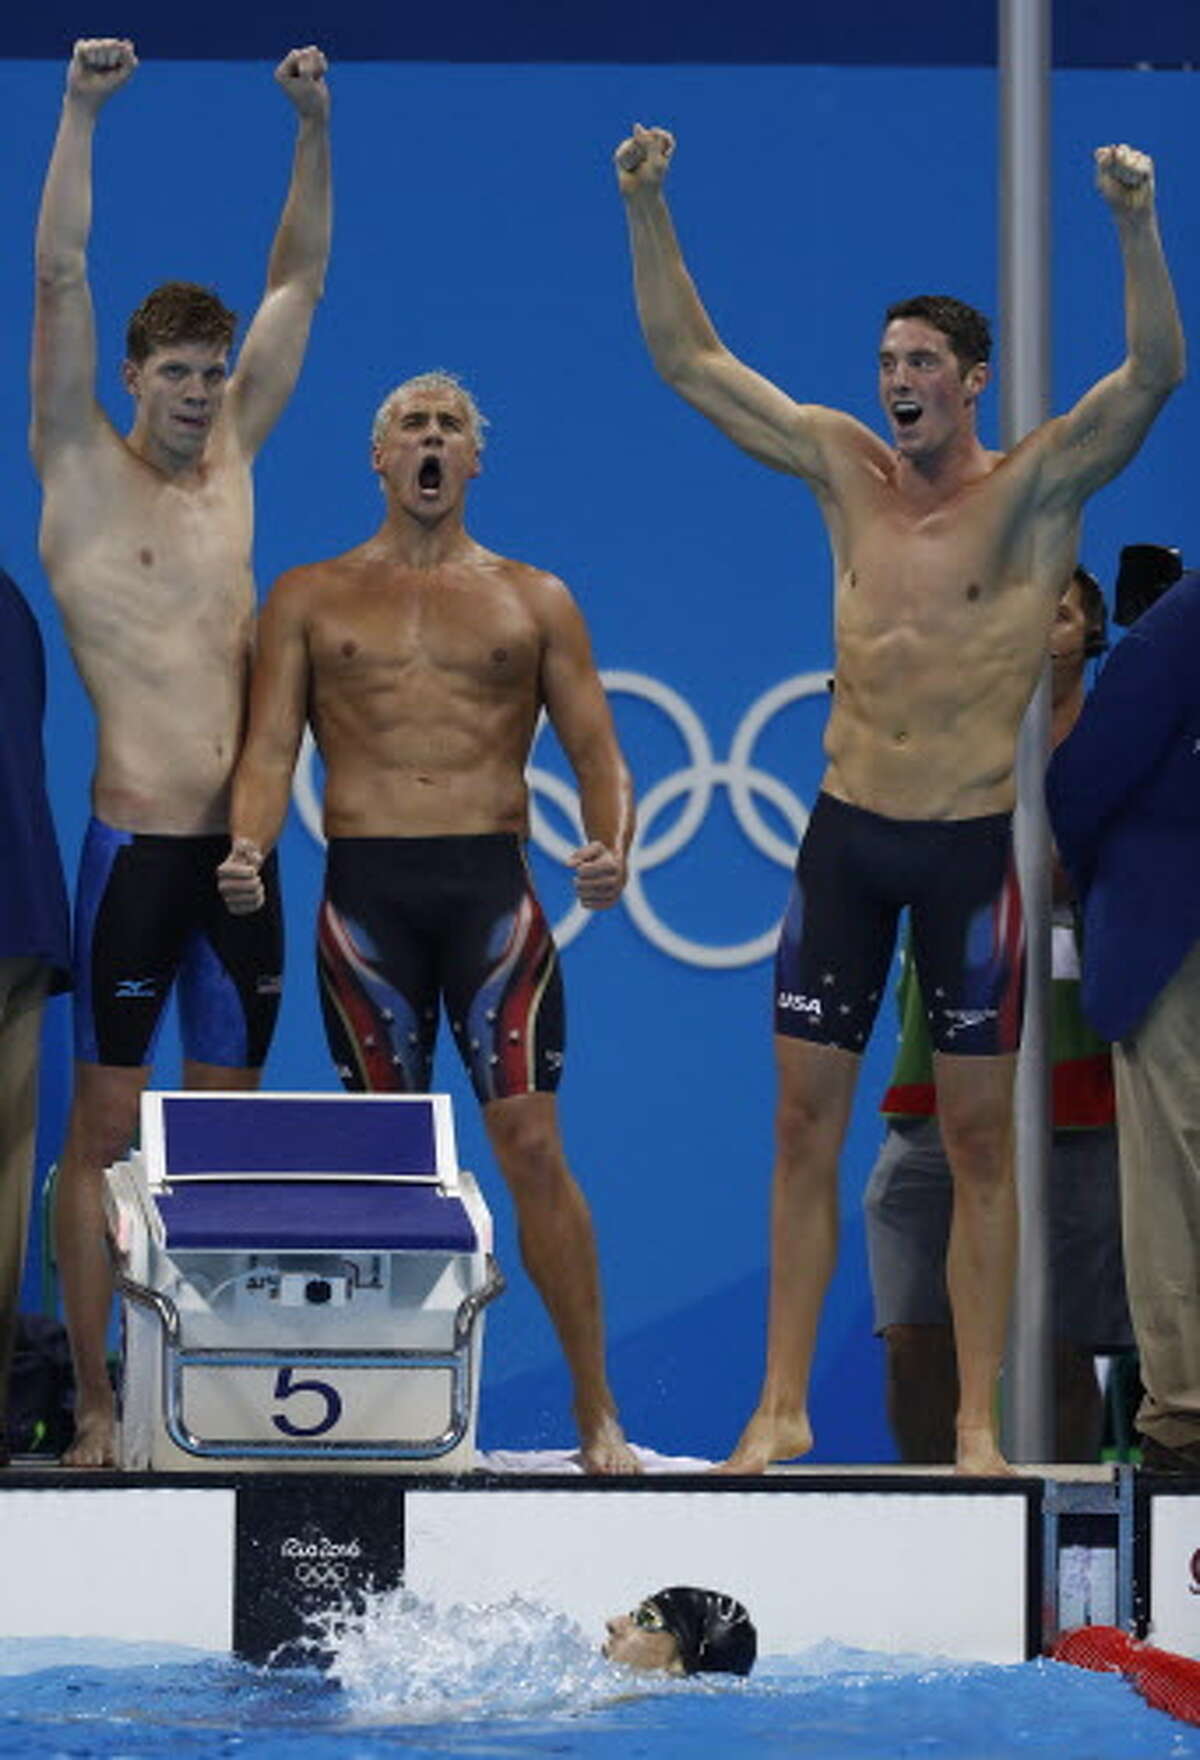 (From topL) USA's Townley Haas, USA's Ryan Lochte and USA's Conor Dwyer celebrate with USA's Michael Phelps (bottom) after they won the Men's 4x200m Freestyle Relay Final during the swimming event at the Rio 2016 Olympic Games at the Olympic Aquatics Stadium in Rio de Janeiro on August 9, 2016. / AFP PHOTO / Odd AndersenODD ANDERSEN/AFP/Getty Images